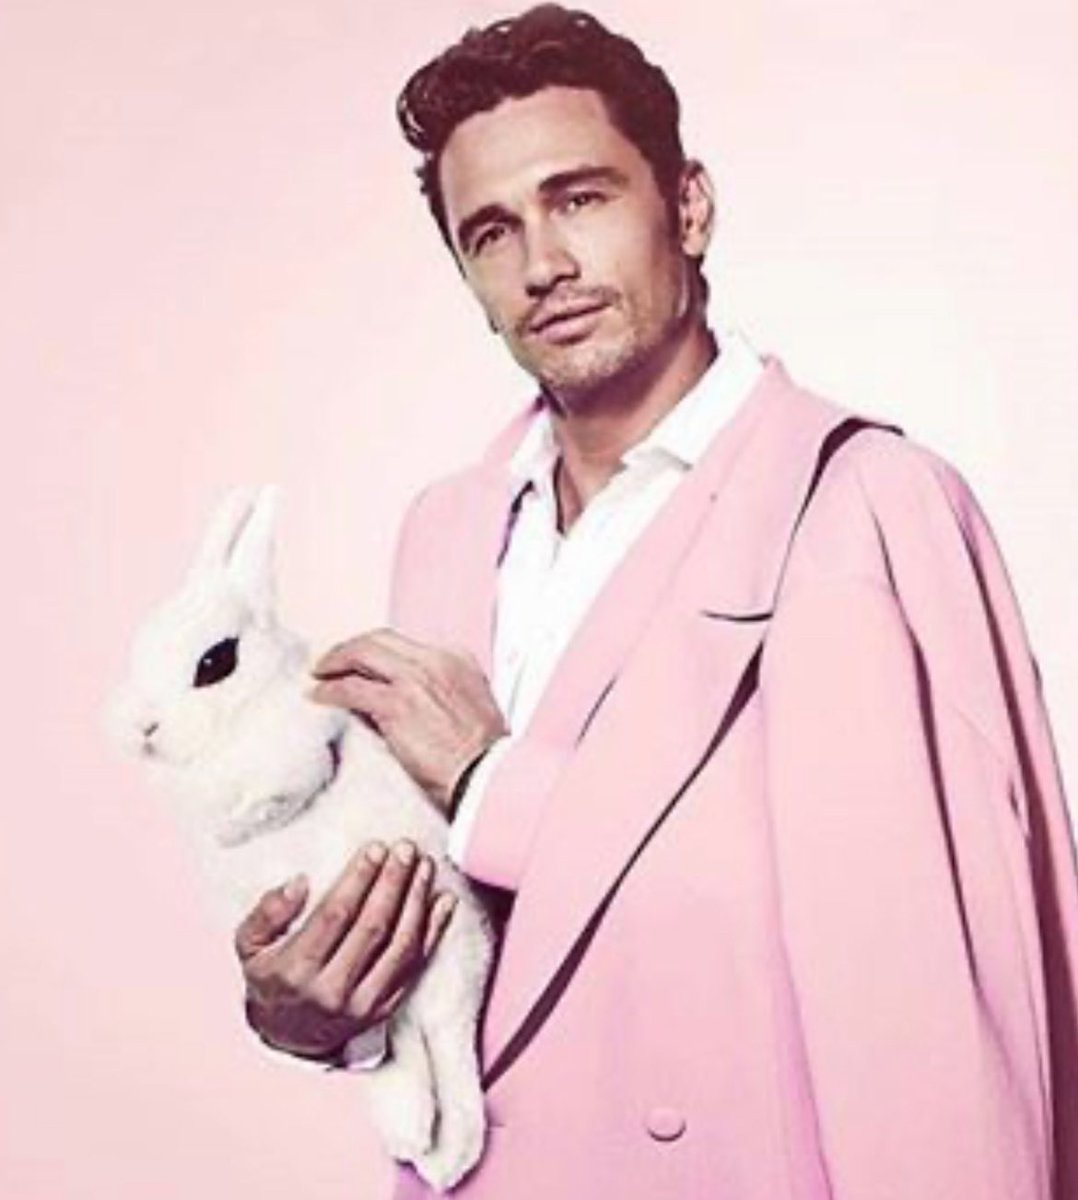 Follow the white rabbit 🐇 
James Edward Franco 
Arrested ⛓️‍💥
Military Tribunal ⚖️
Executed ☠️ 
#CrimesAgainstHumanity 
#SaveTheChildrenWorldWide 
Pink is code for #Adrenchrome